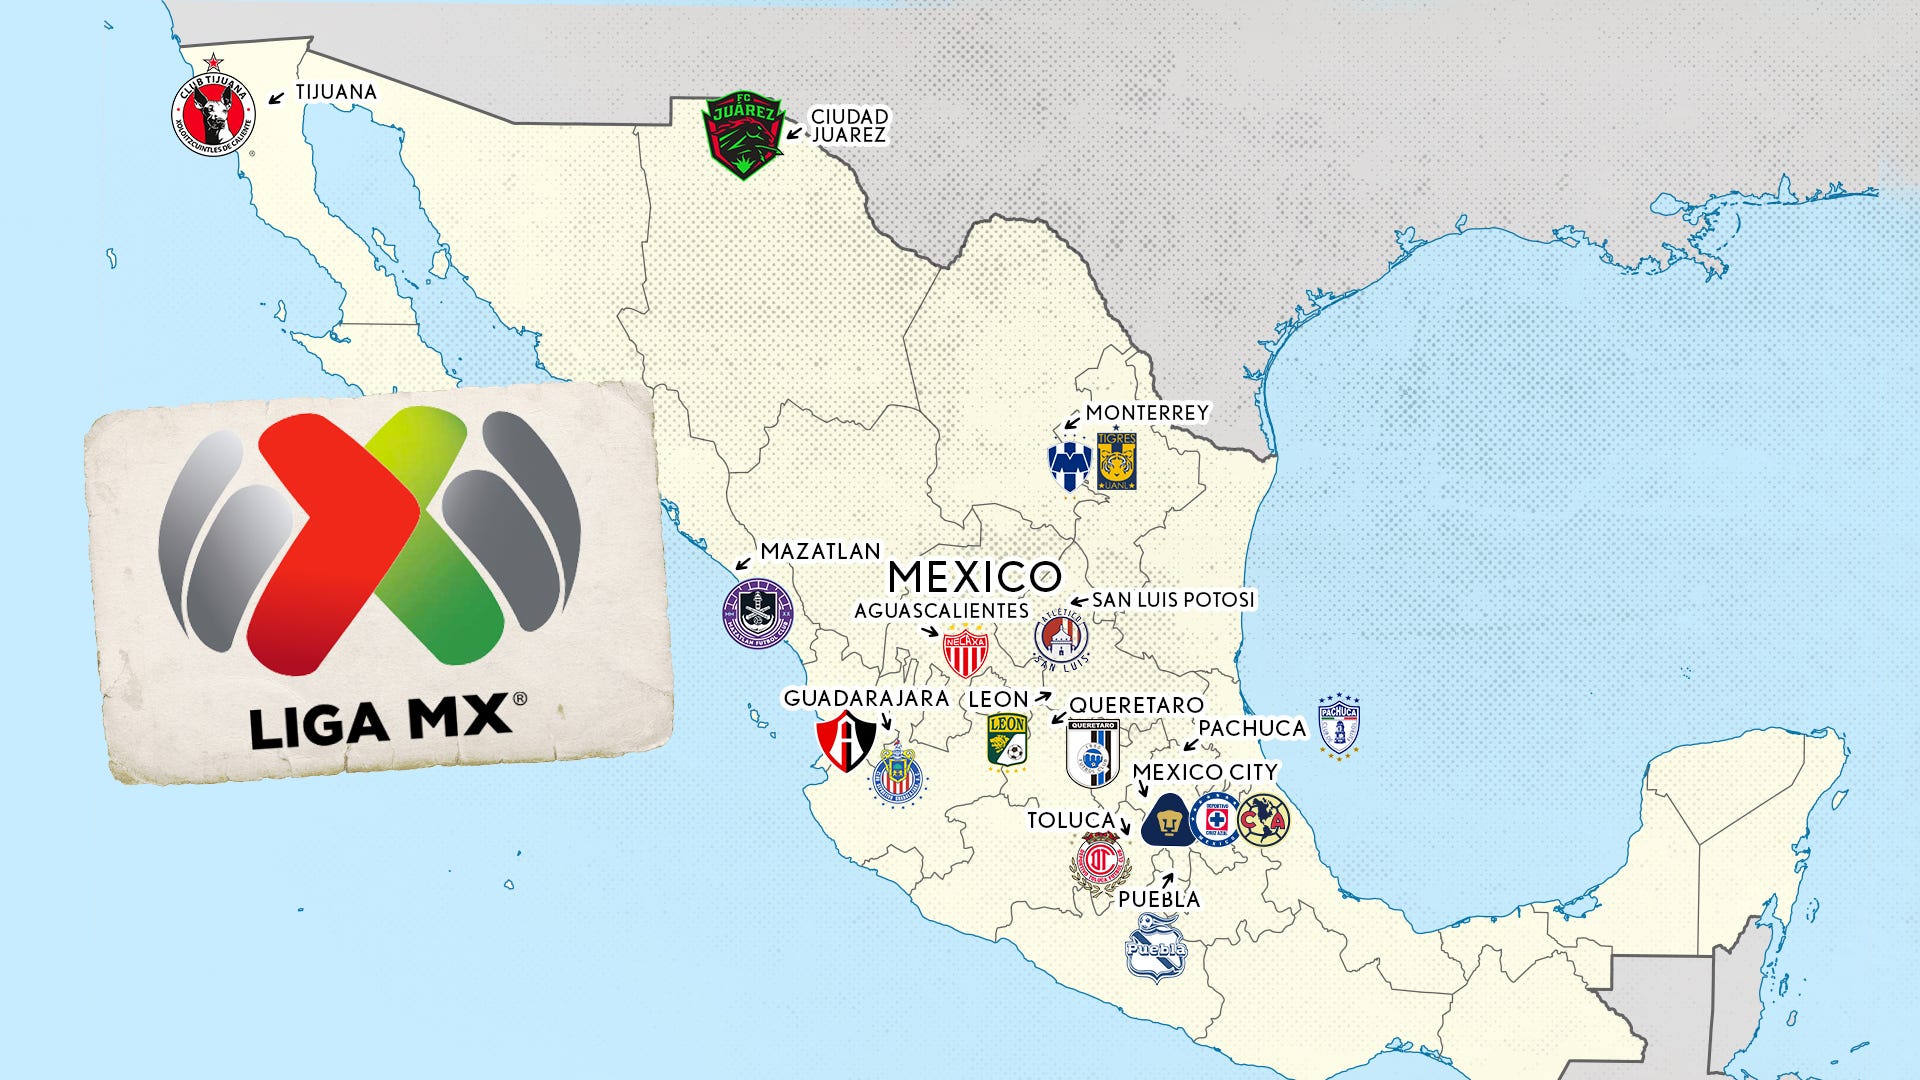 Liga MX: Map locations & stadiums of every team in Mexico's top